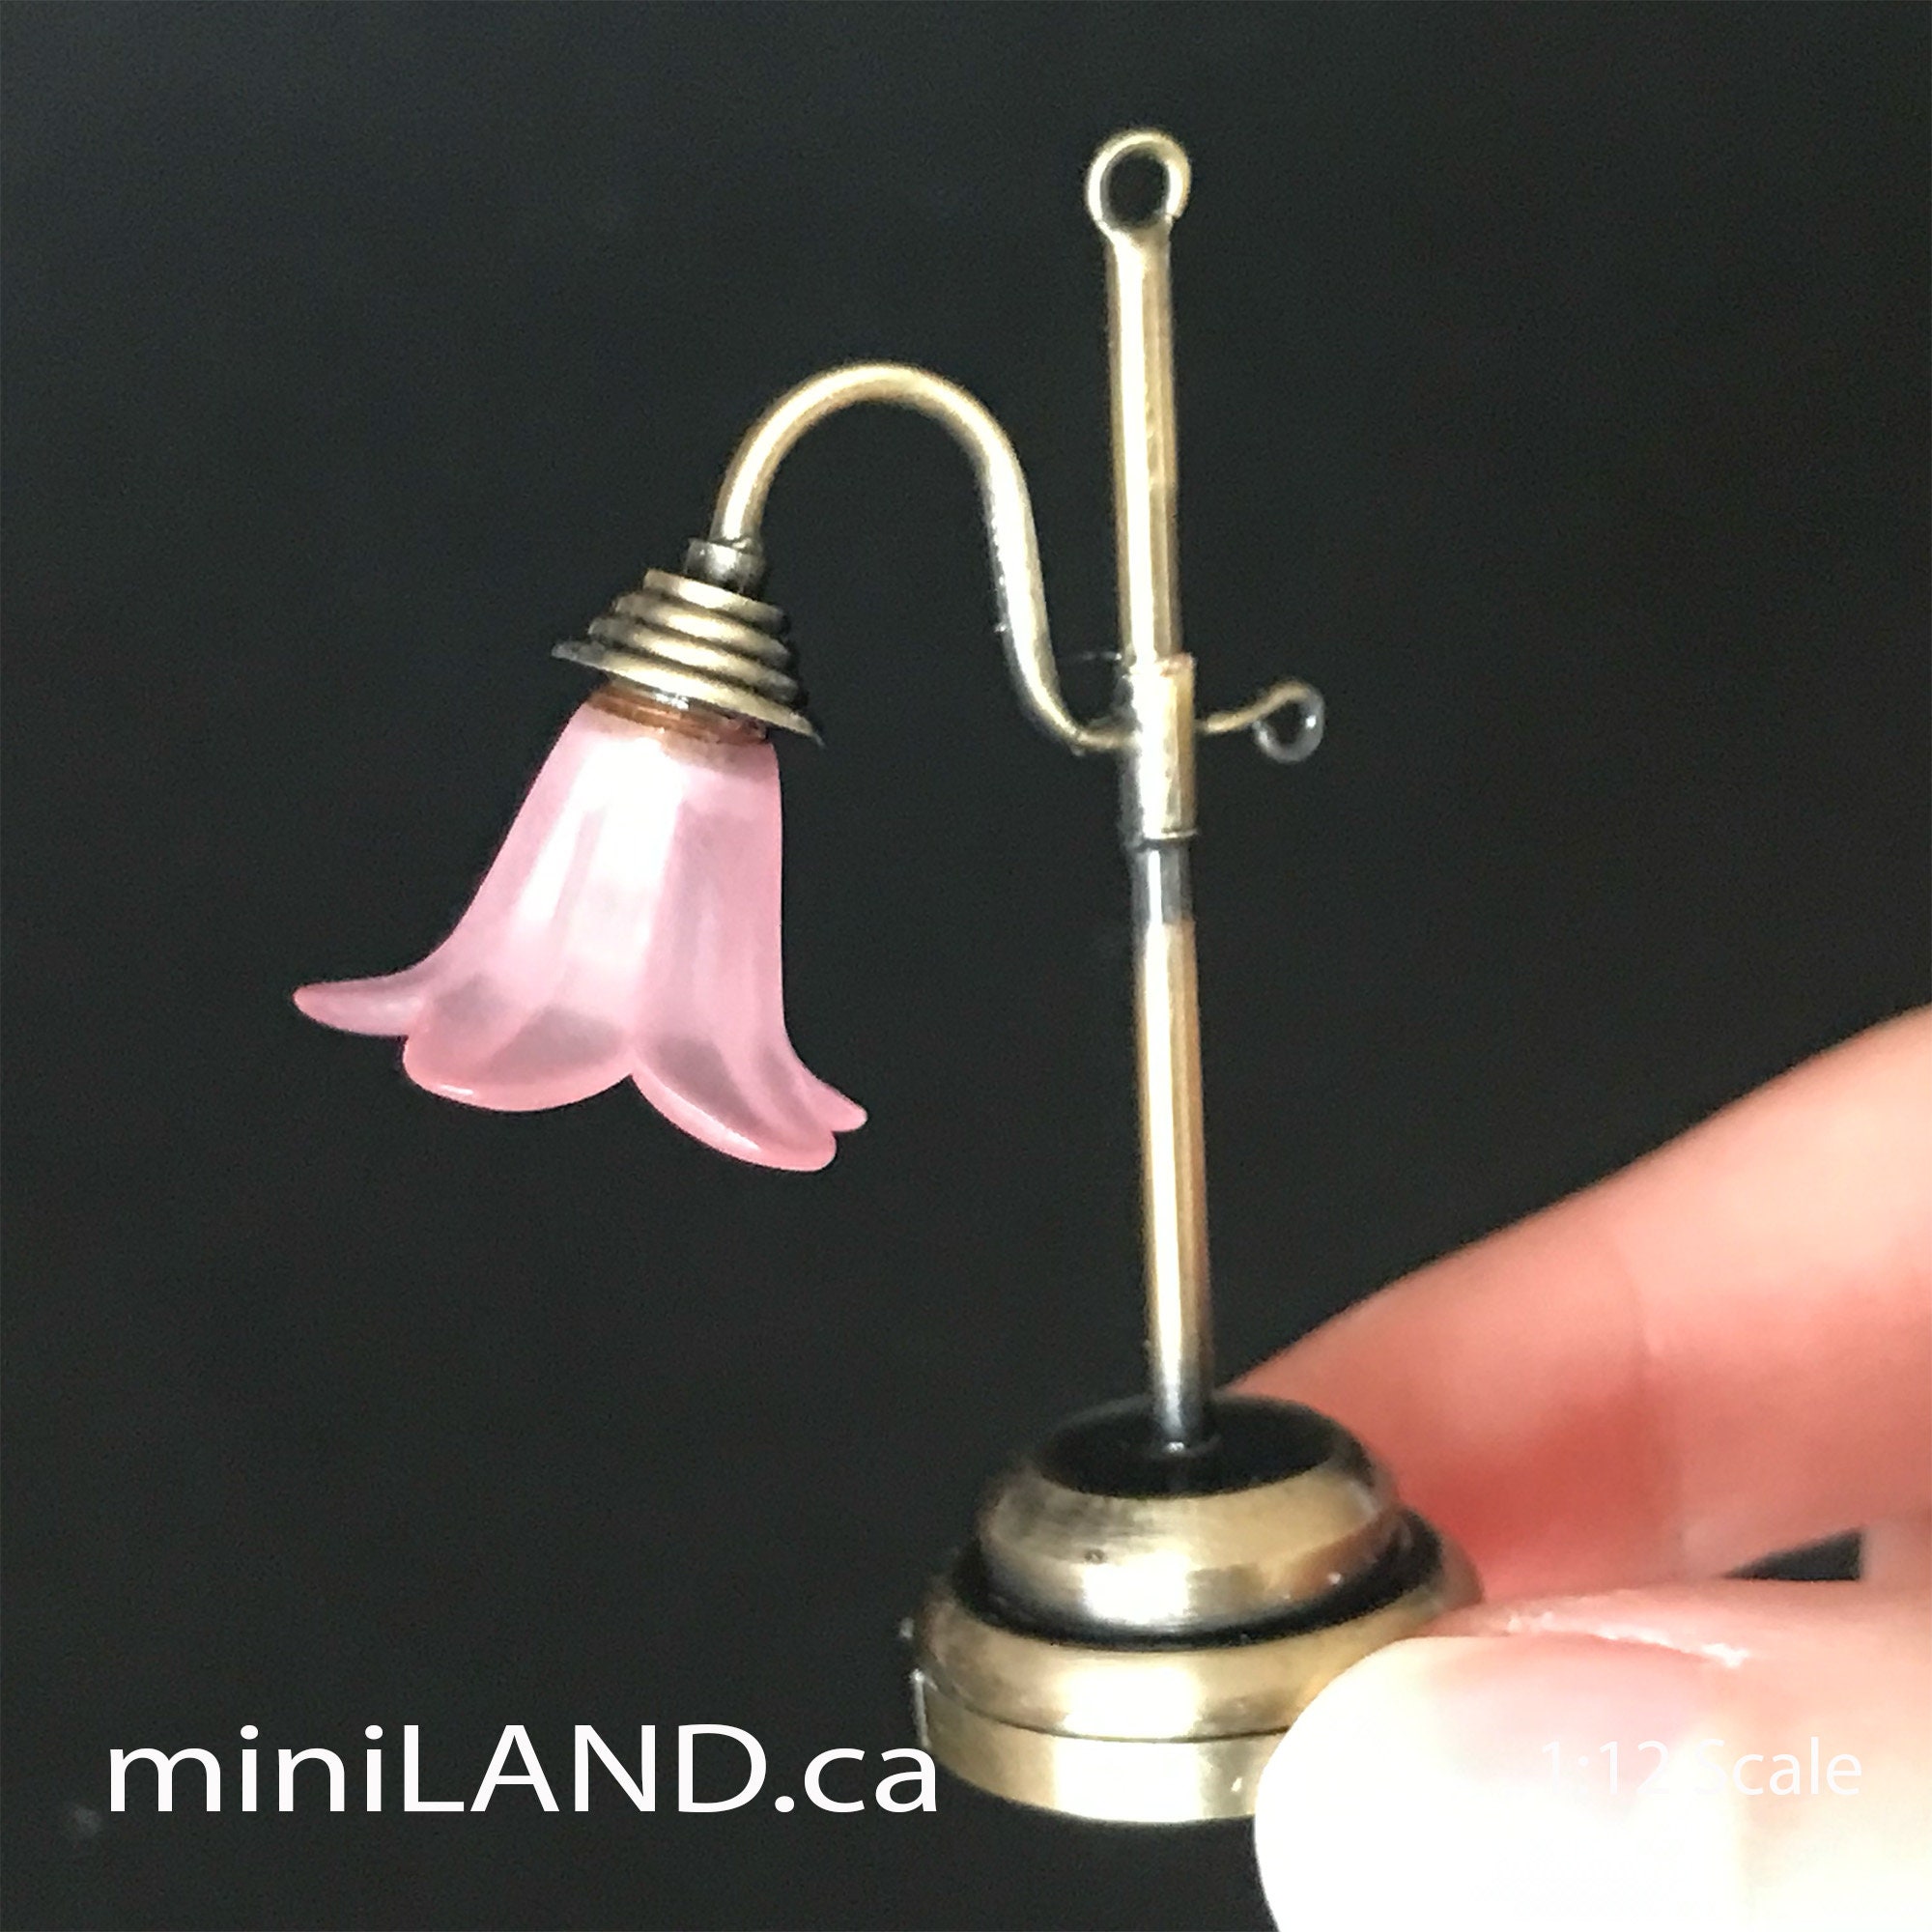 Brass Table Lamp tulip pink LED Super bright with Onoff switch for 1:12 dollhouse miniature